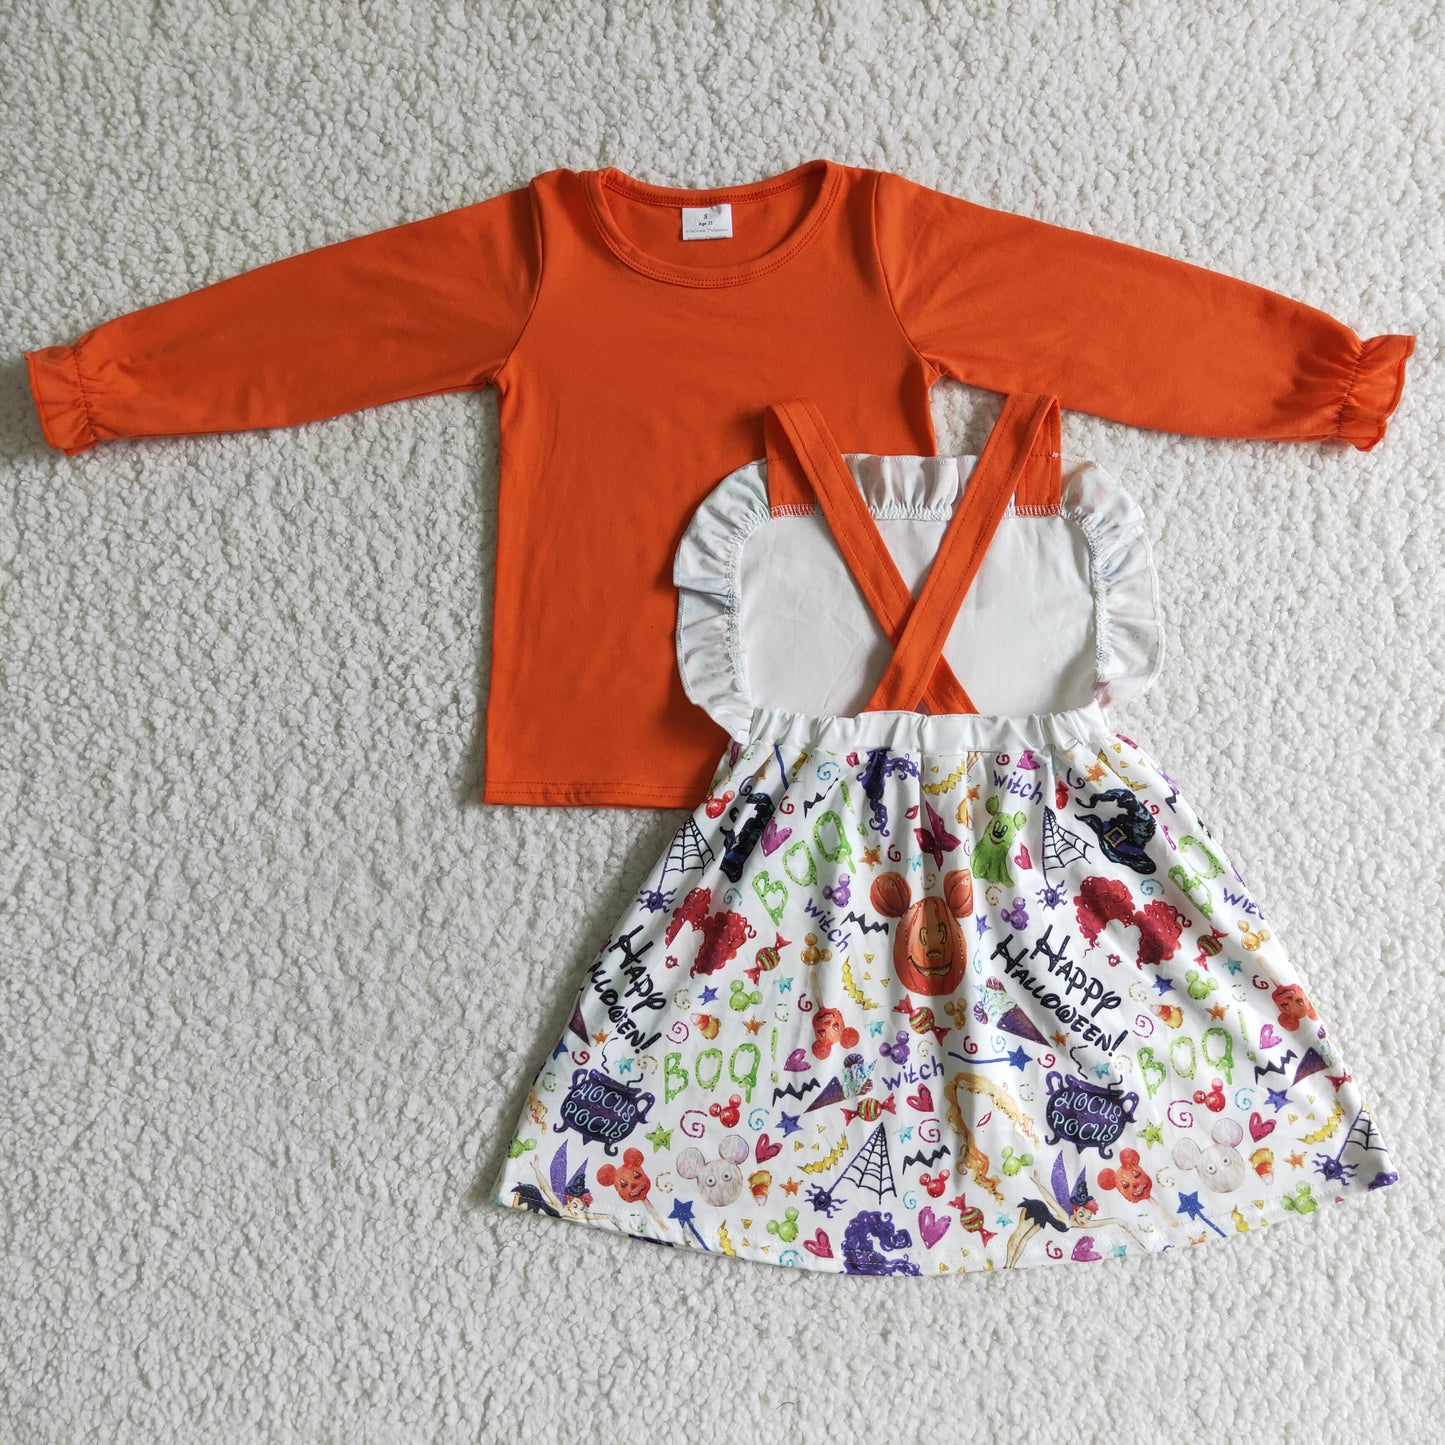 GLD0033 Orange Top and Pumpkin Halloween Outfit